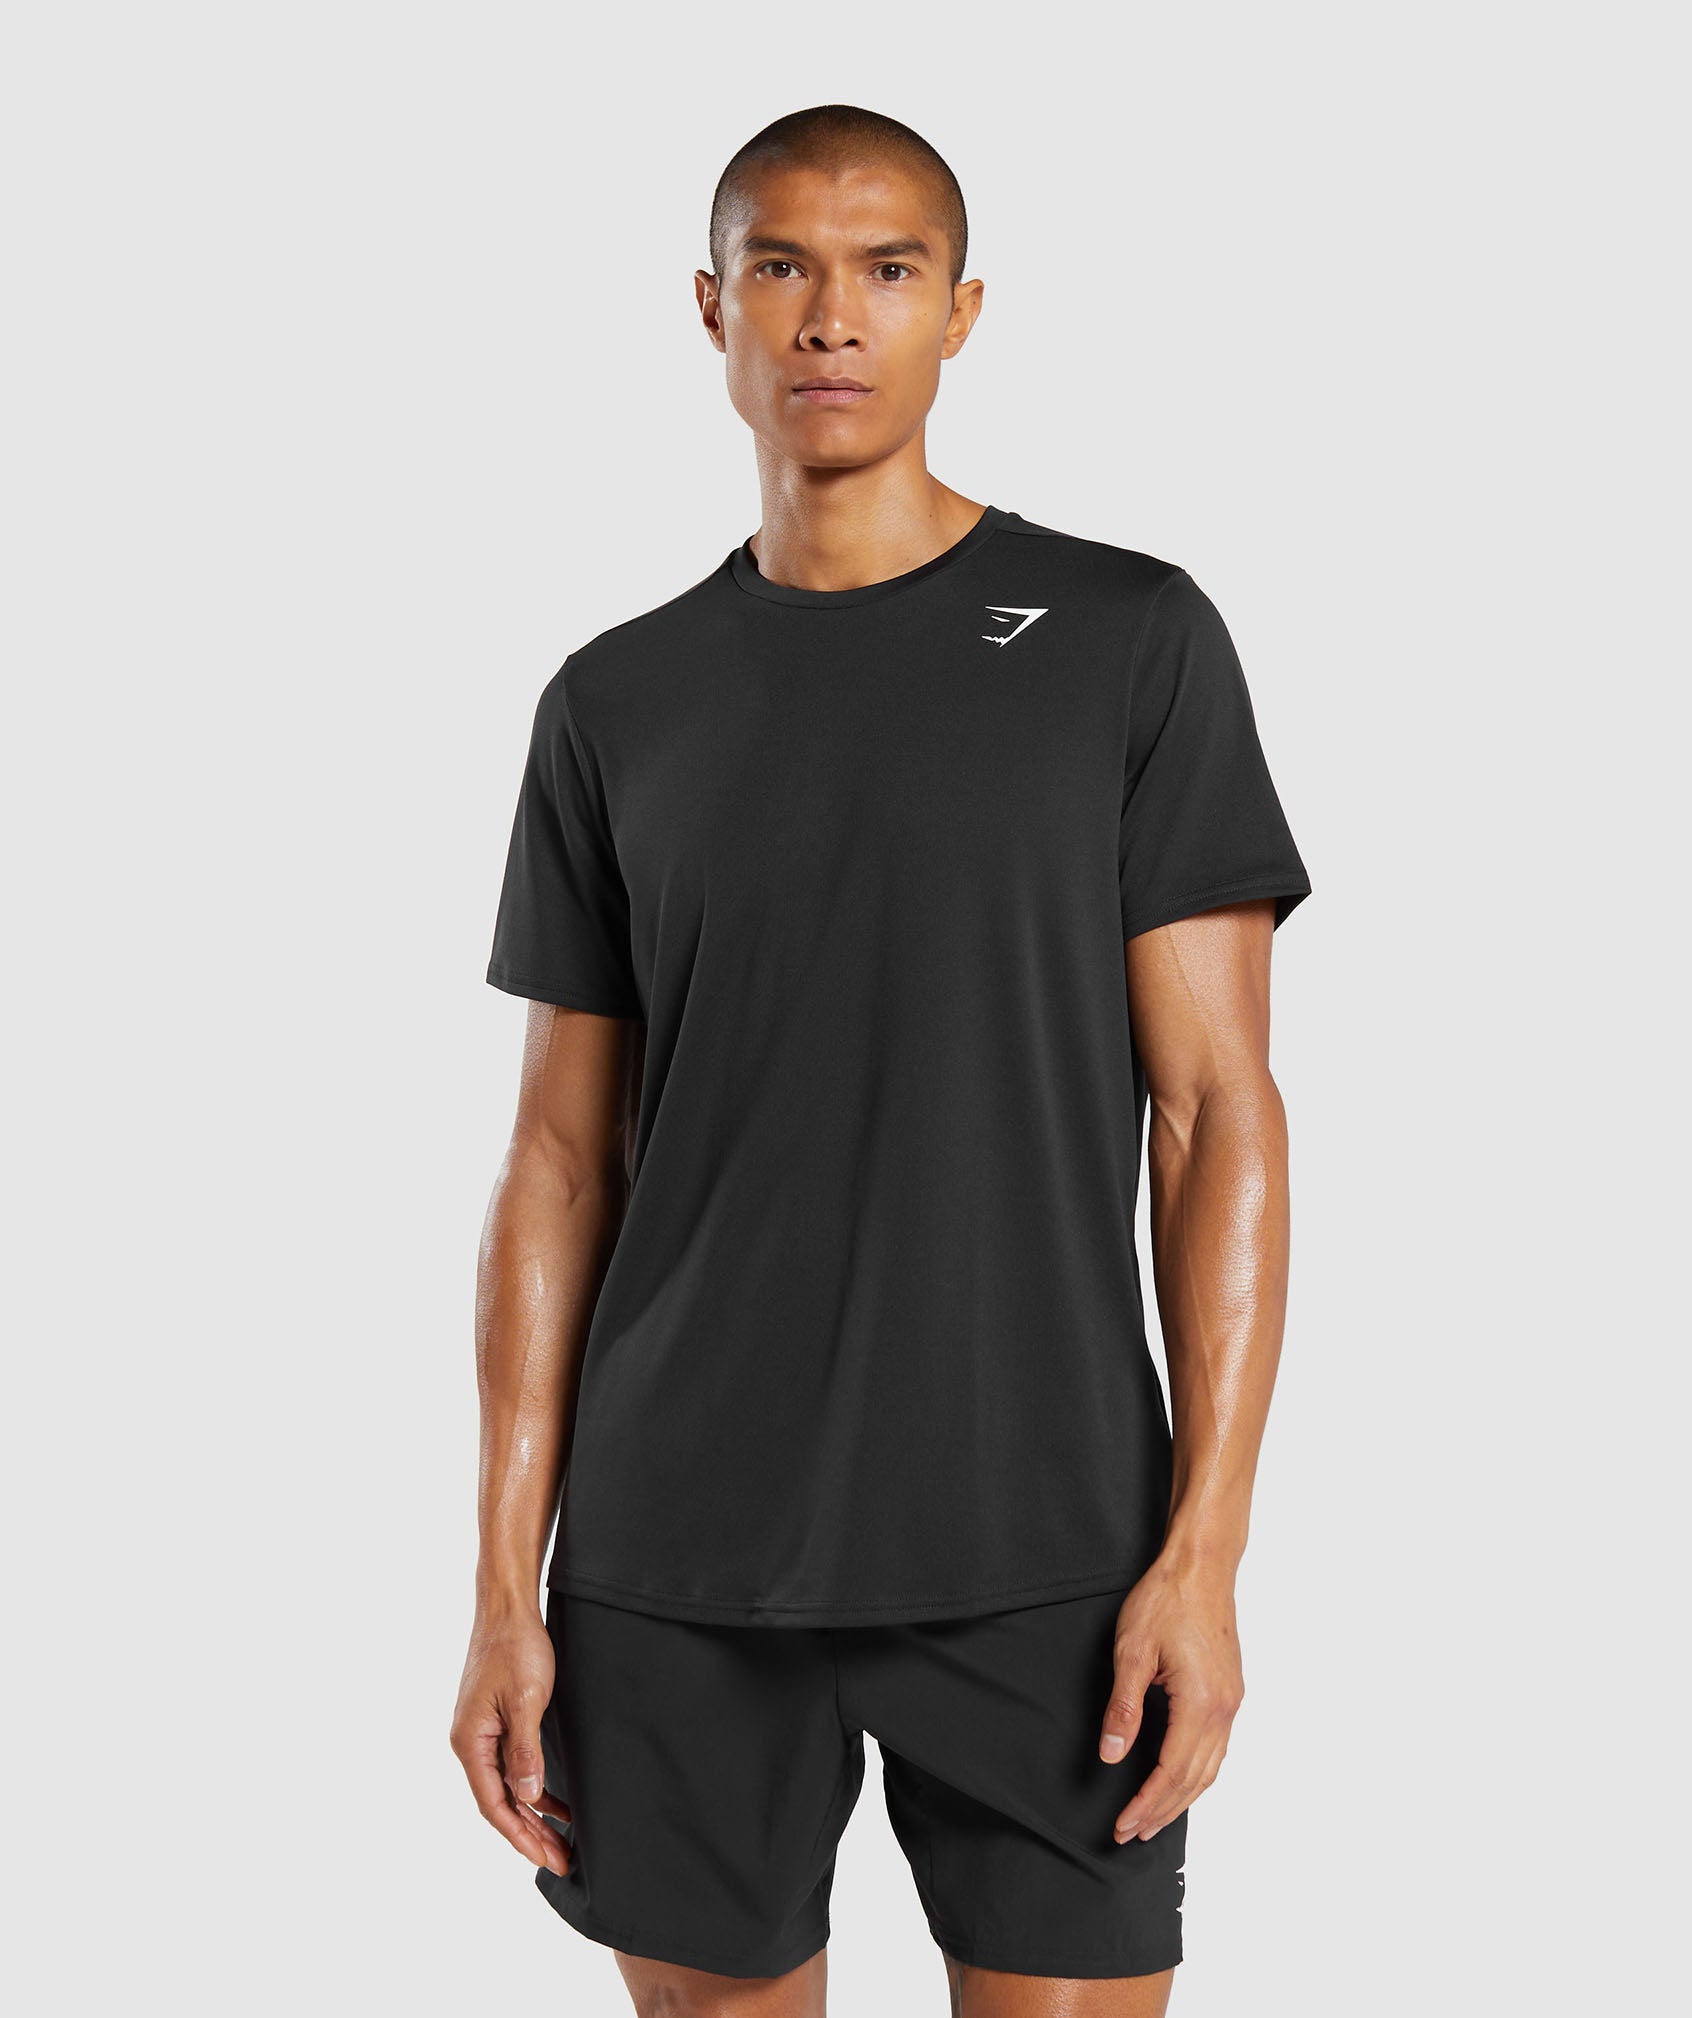 Men's Gym Tops & T-Shirts - Workout shirts from Gymshark